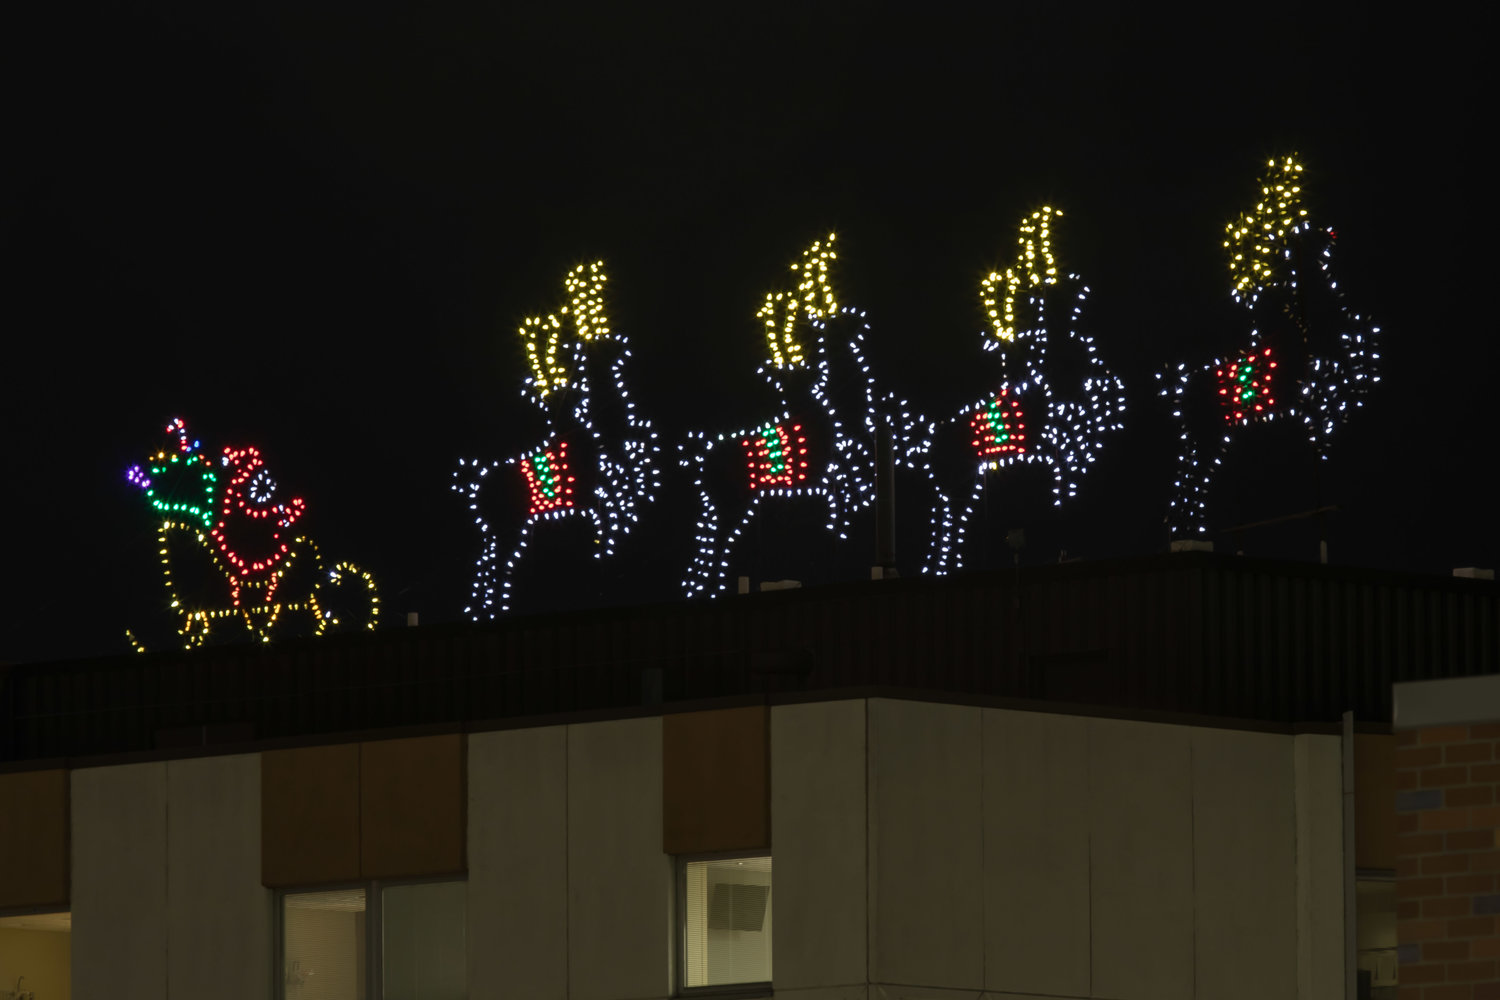 The Santa and reindeer display on the roof of Sparrow Hospital on Michigan Avenue has been a Christmas icon for decades.